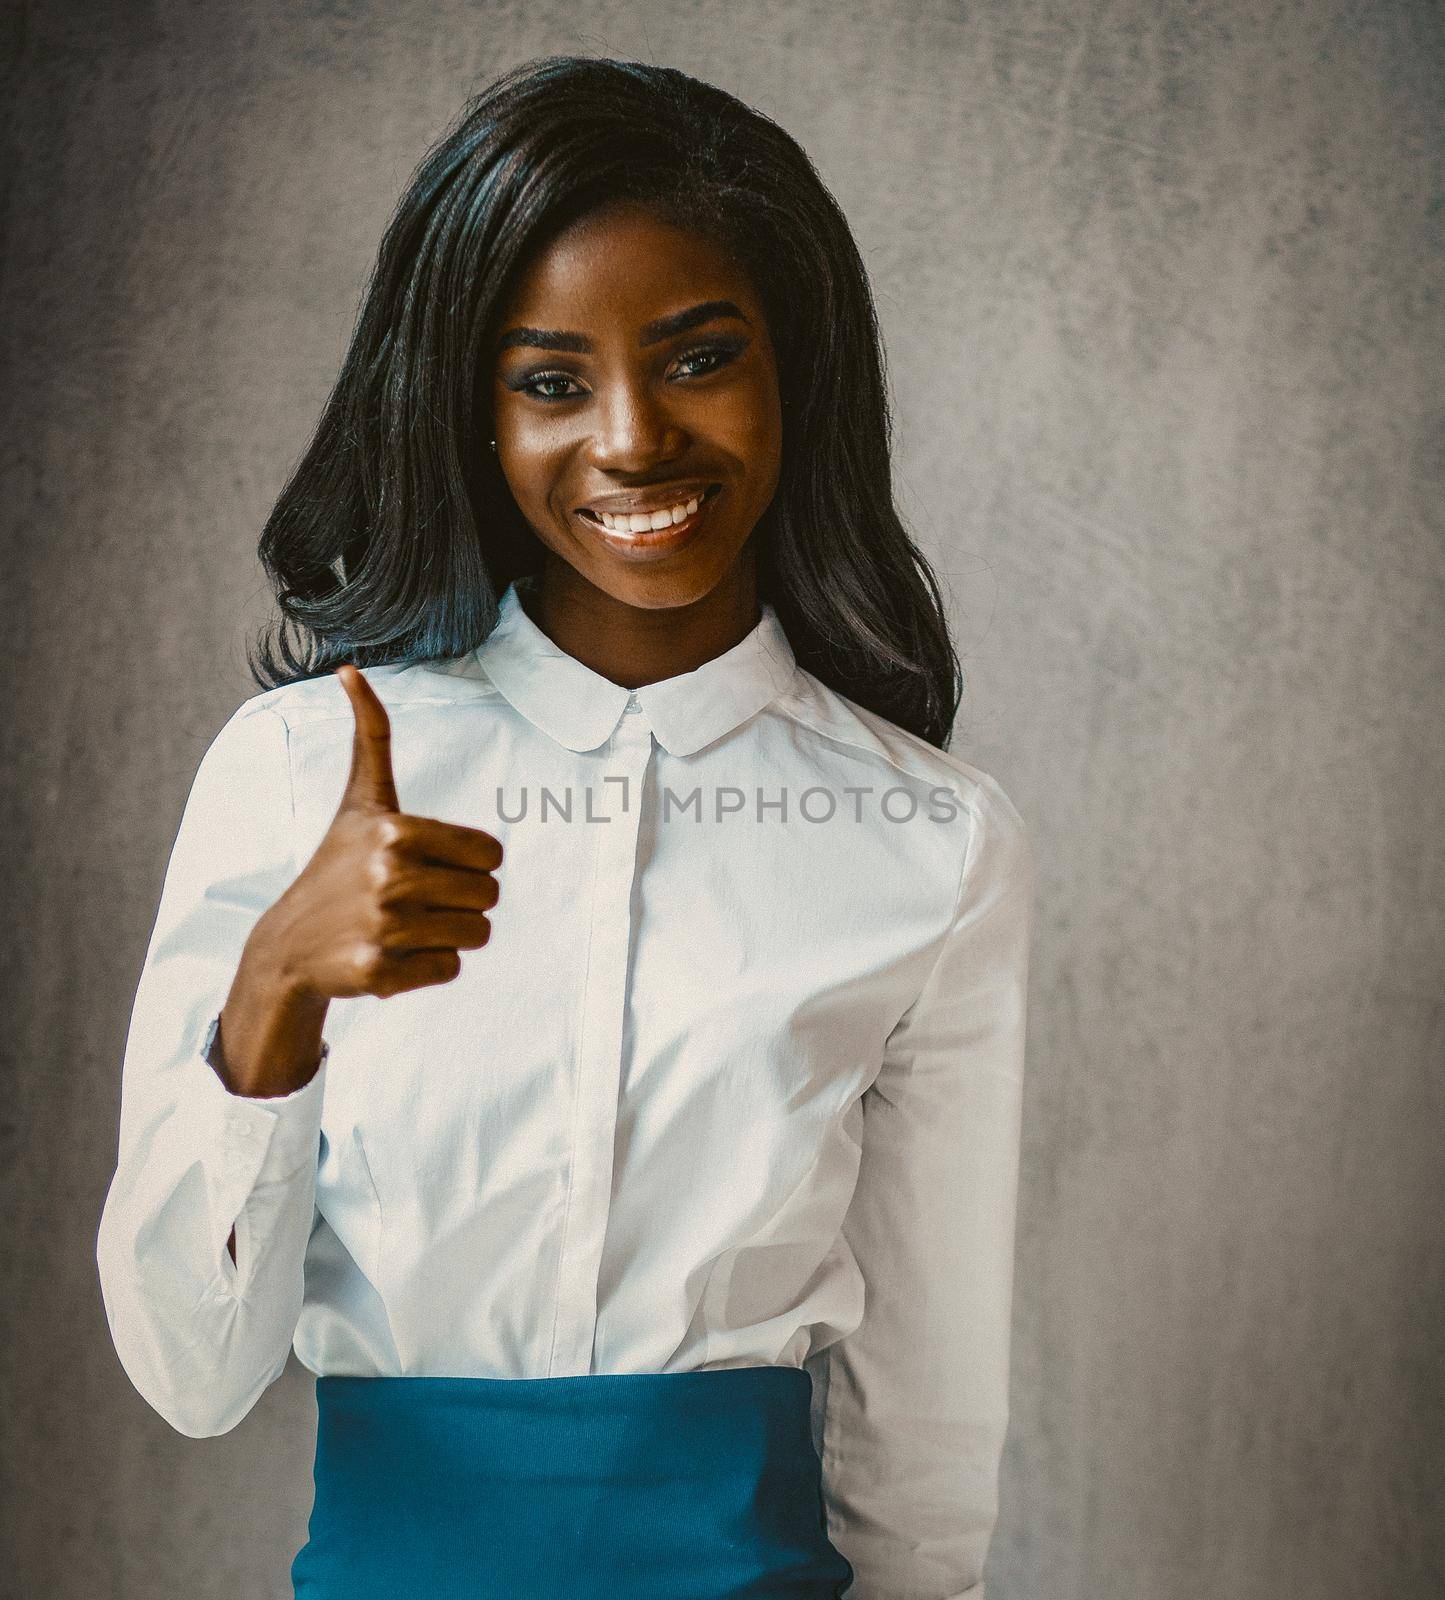 Cute African businesswoman shows thumb up Gesture, Portrait Of Cheerful Dark-Skinned Woman, Female White Collar Worker Demonstrating Thumbs Up Sign, Toned Image